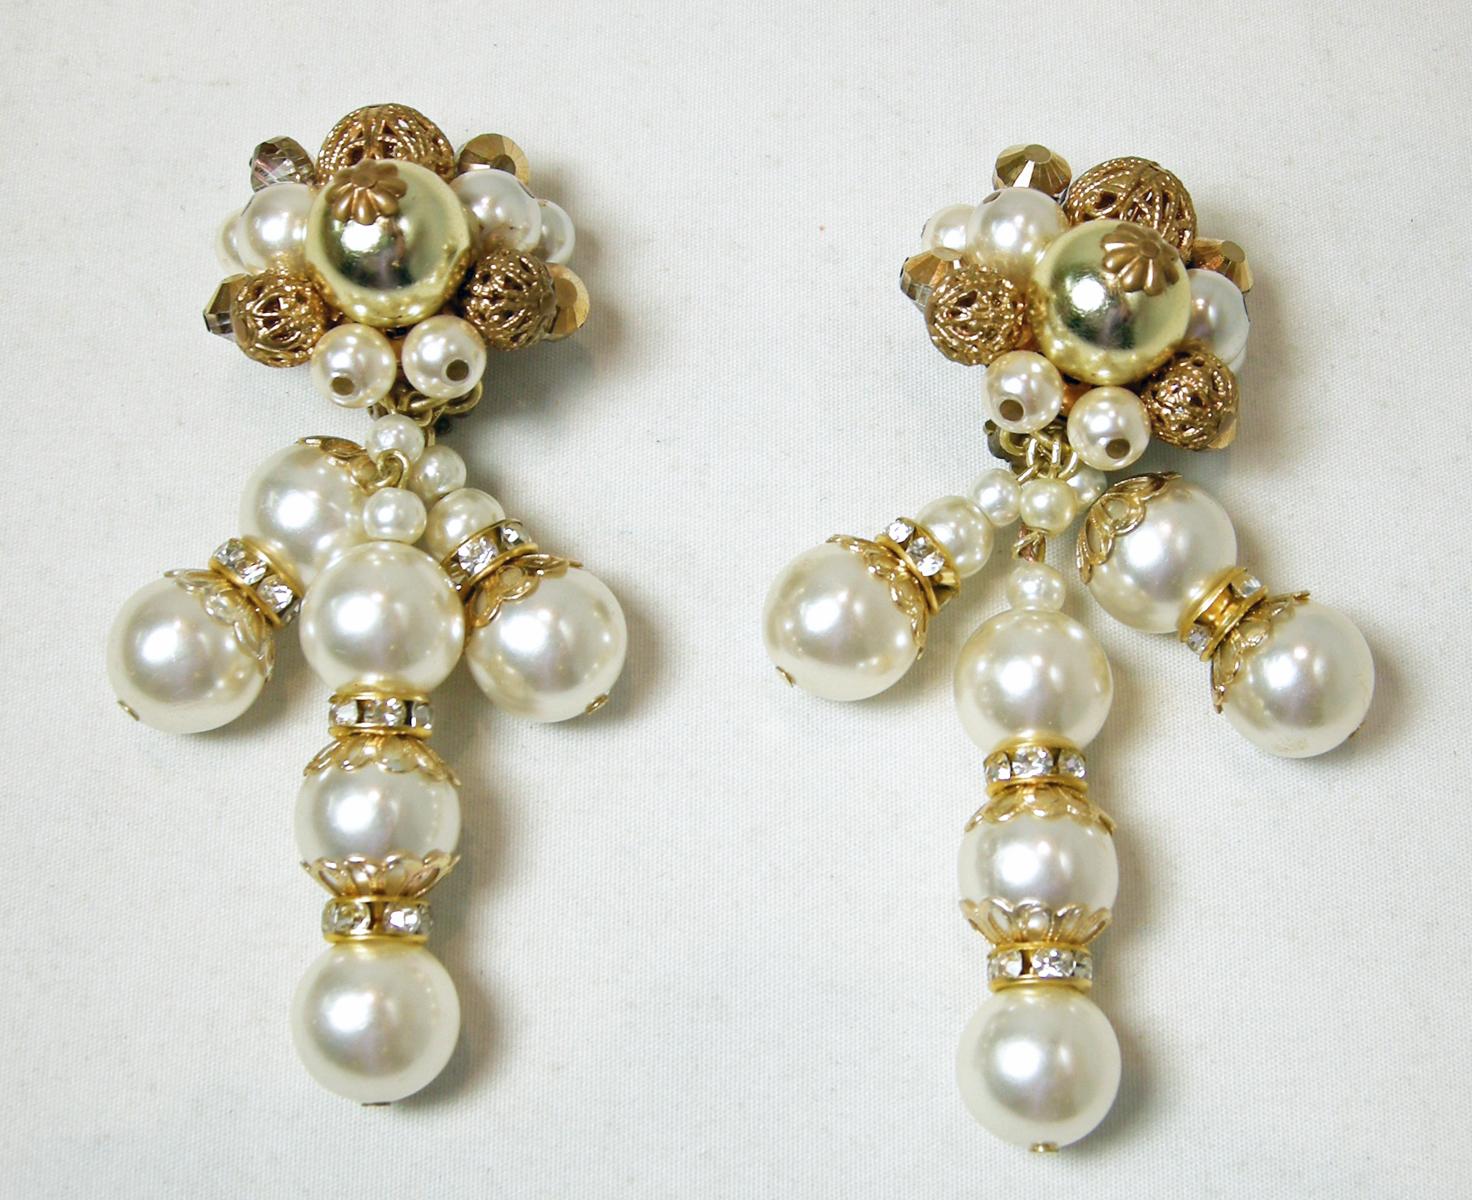 These vintage signed DeMario earrings feature faux pearls with gold tone filigree balls on top. There are pearl drops with crystals accents.  In excellent condition, these clip earrings measure 3” x 1” and are signed “DeMario.”.